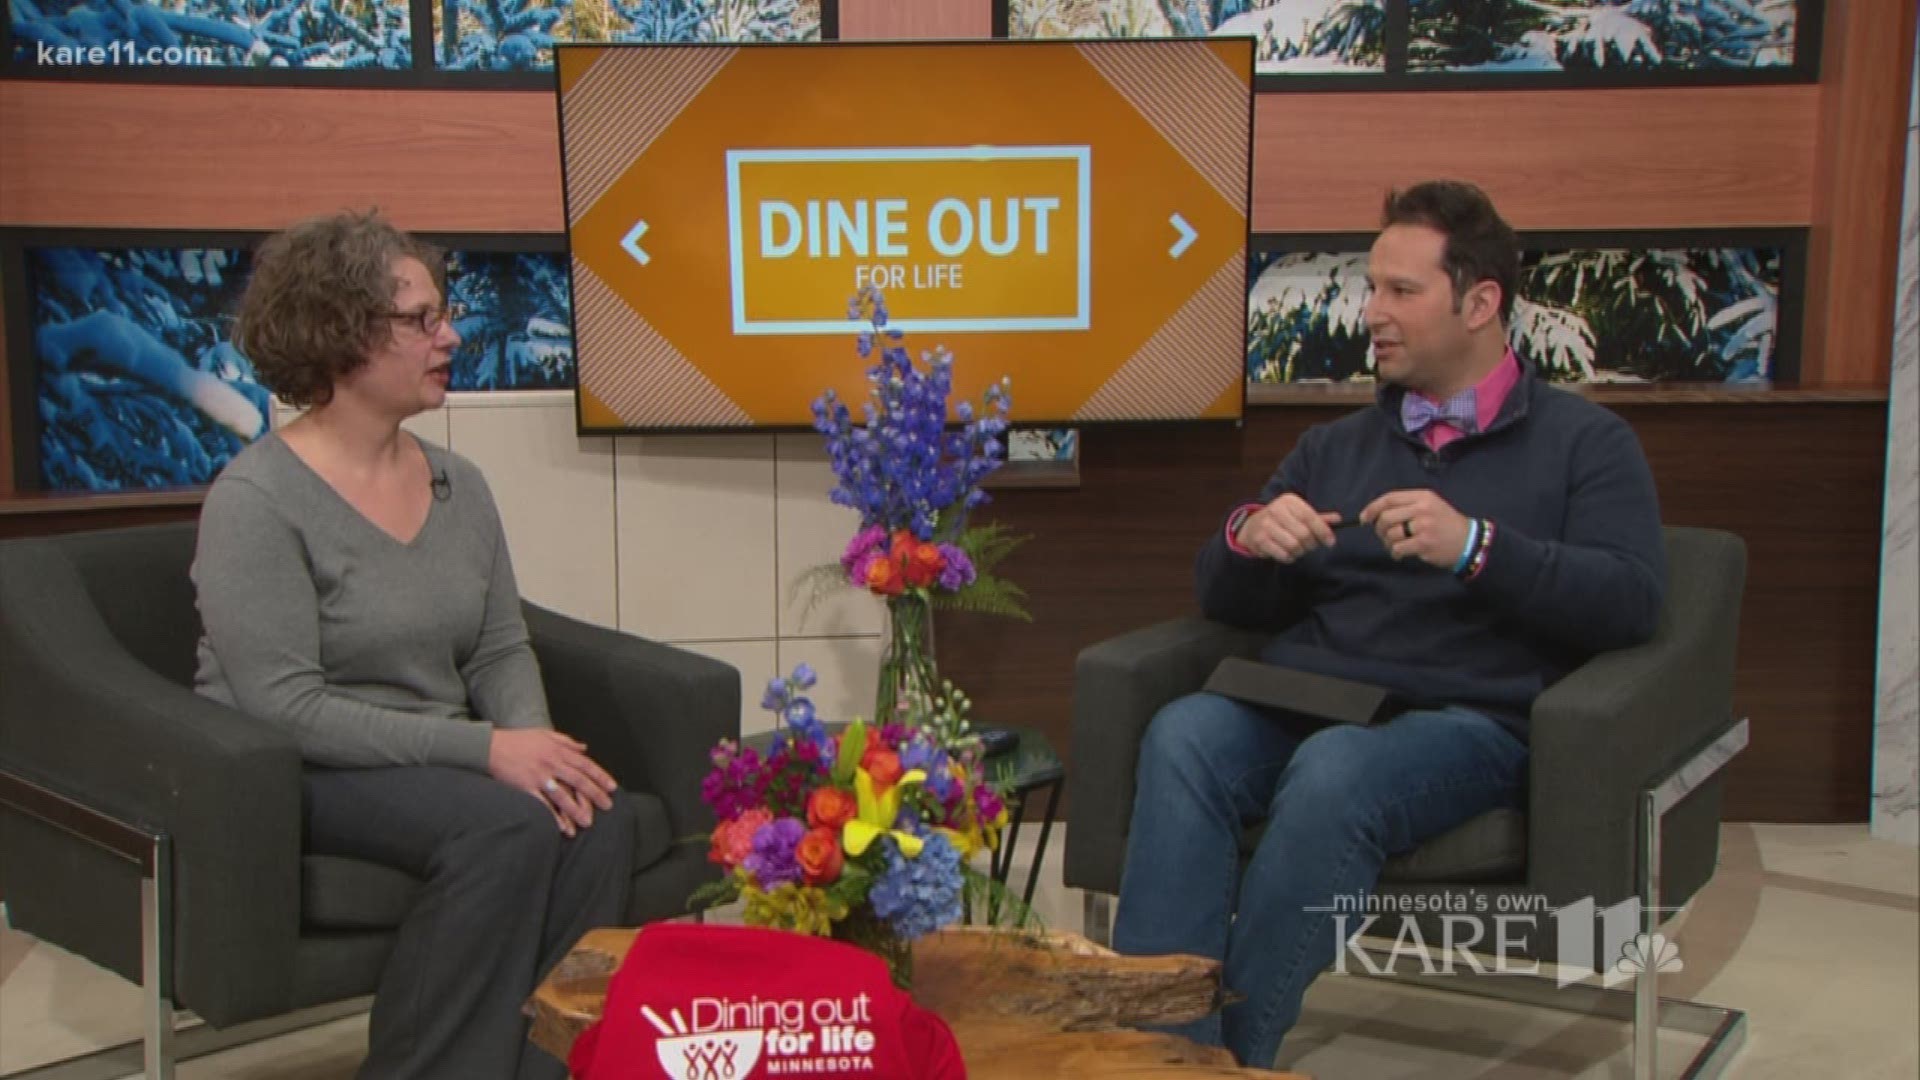 Amy Moser joins Kare 11 to talk about the Aliveness Project mission and their Dining Out For Life event on April 26 which supports community members with HIV. Check out more at diningoutforlife.mn.org.